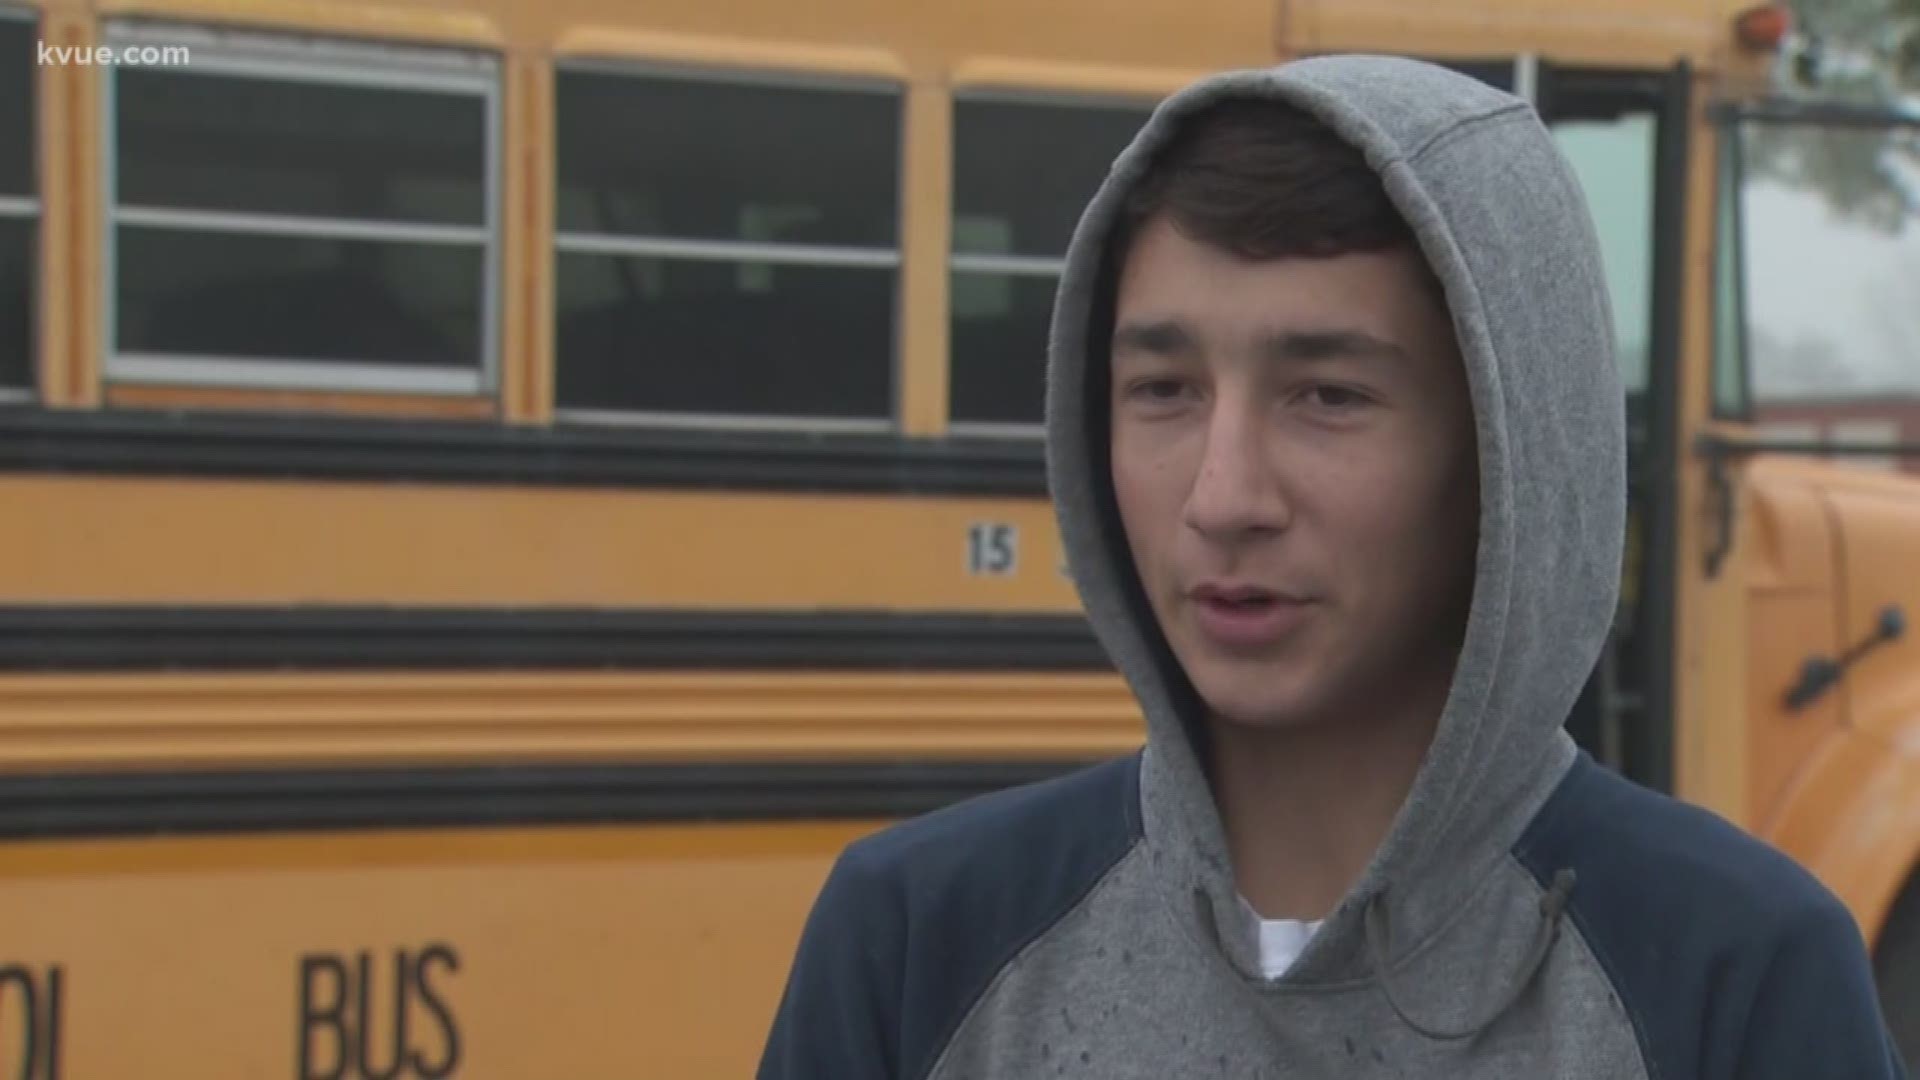 Two students jumped into action when they realized their bus driver was having a medical emergency while driving the school bus.